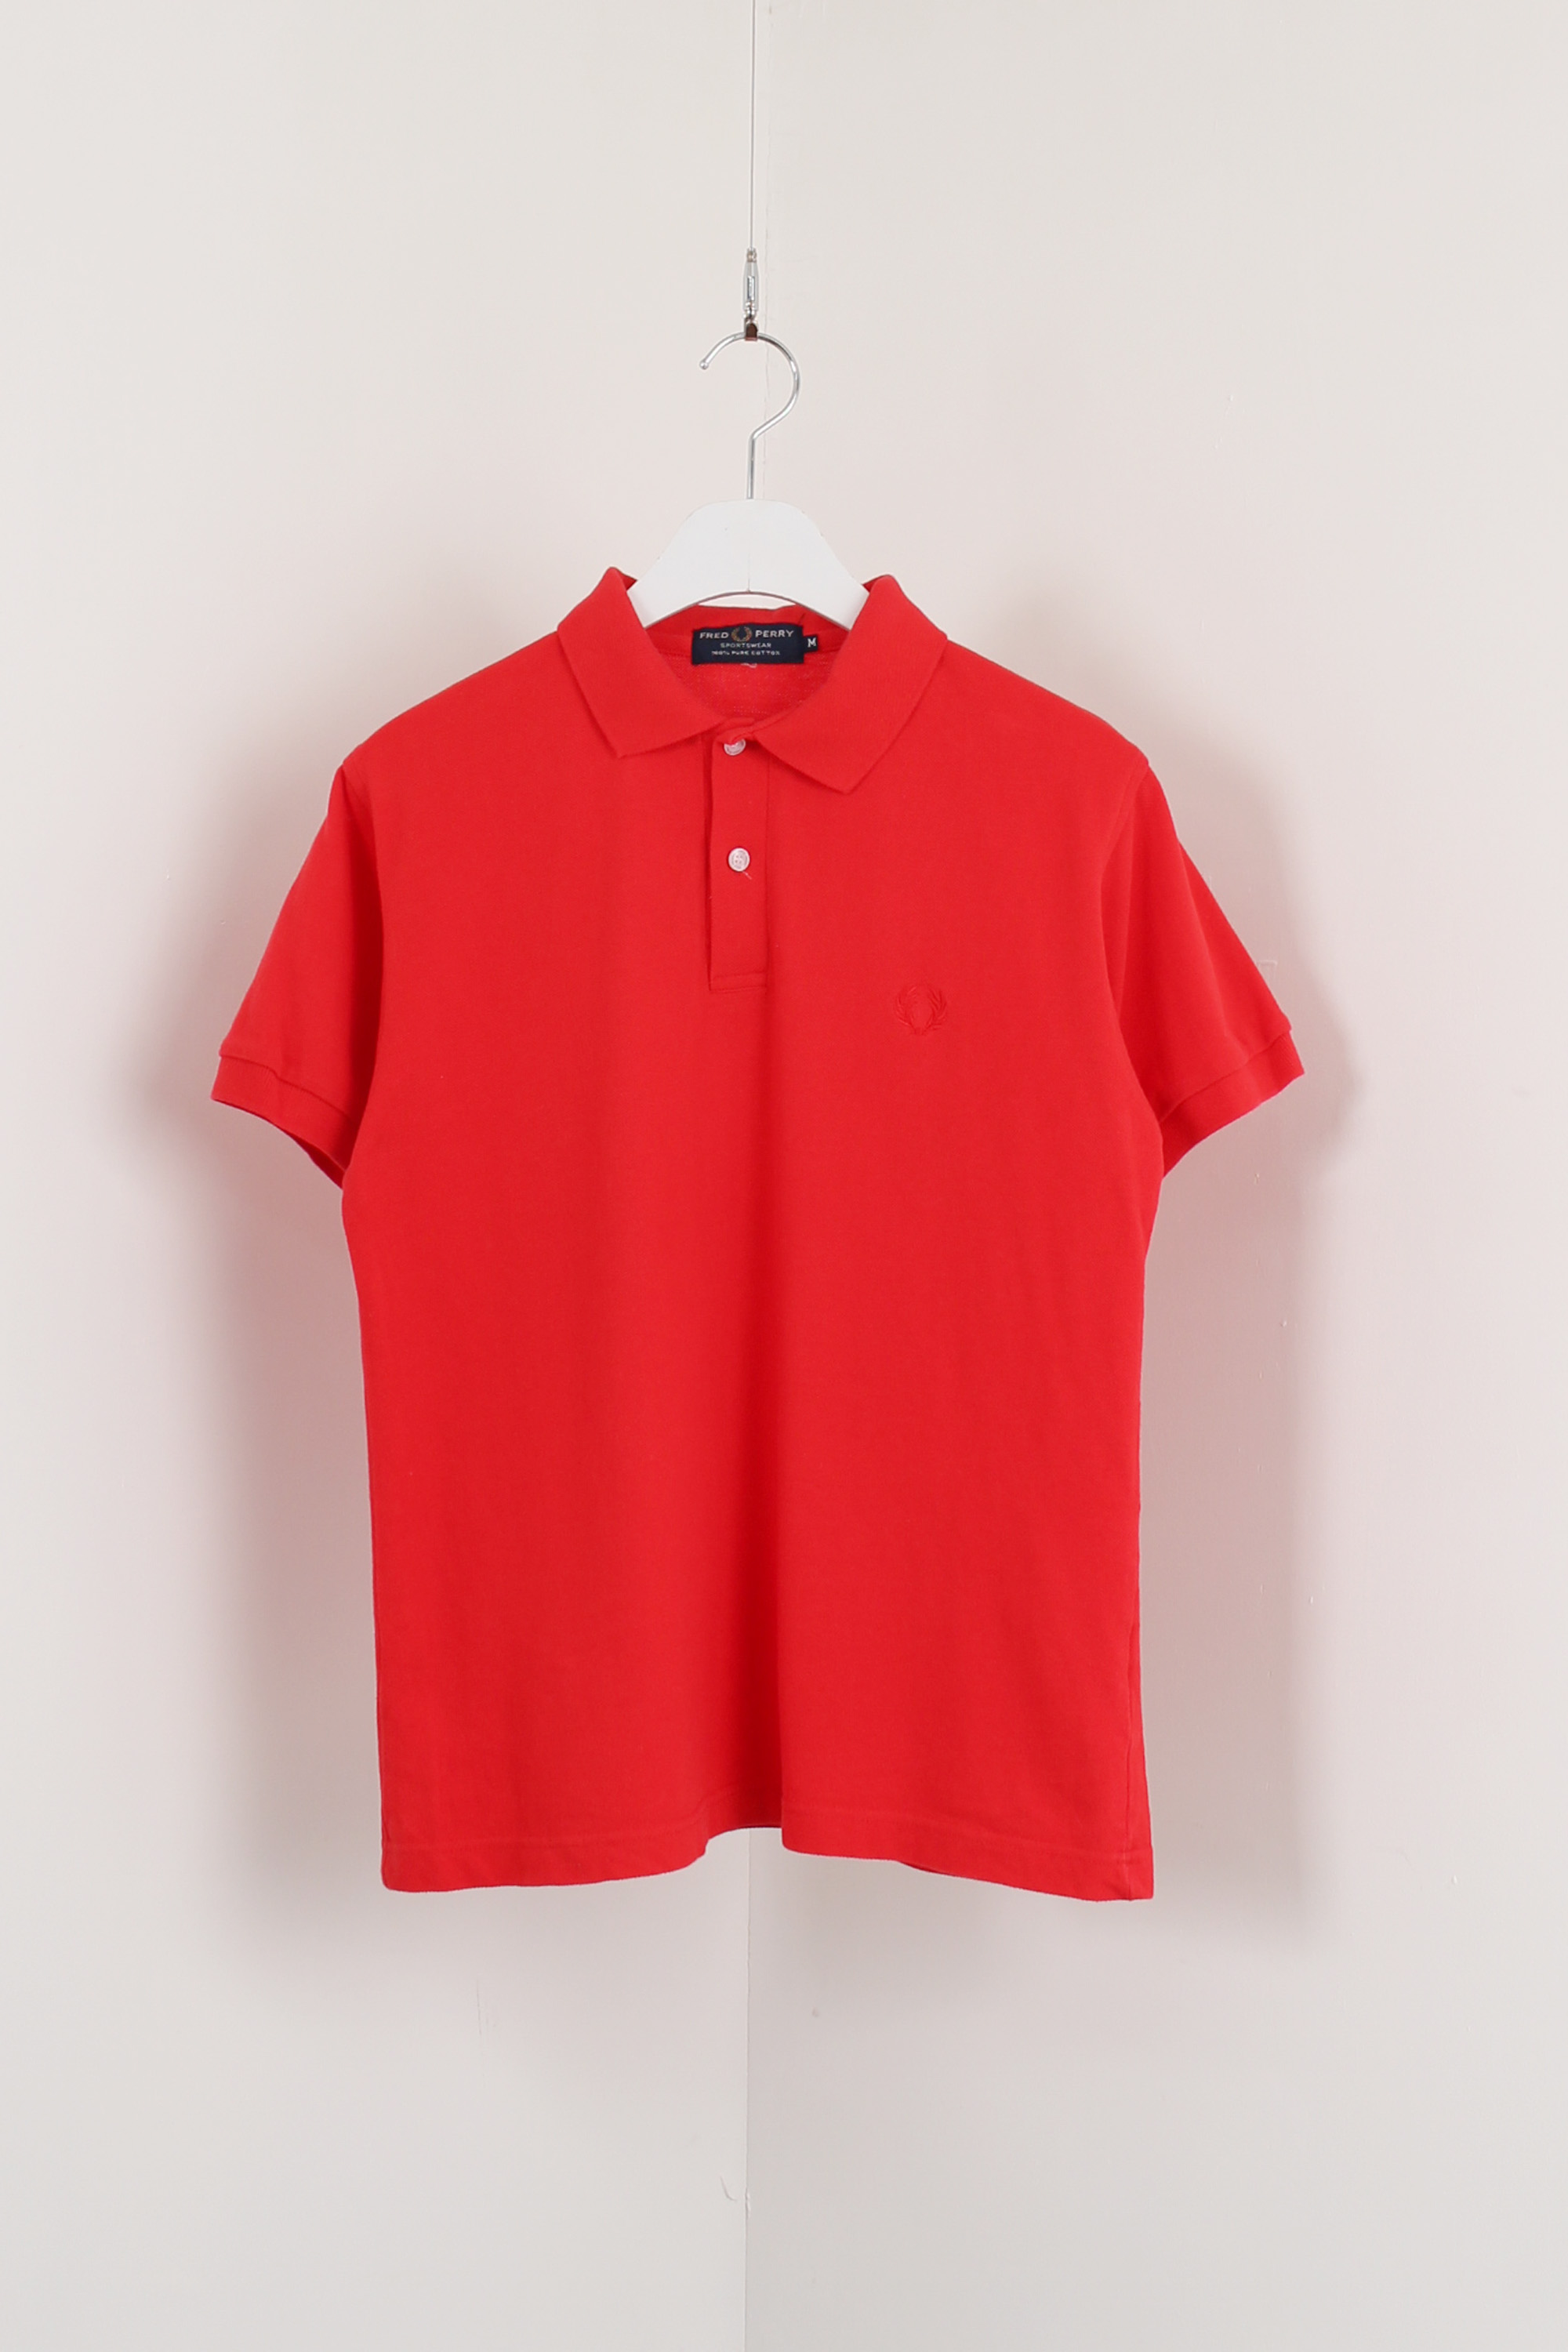 FRED PERRY pique shirt